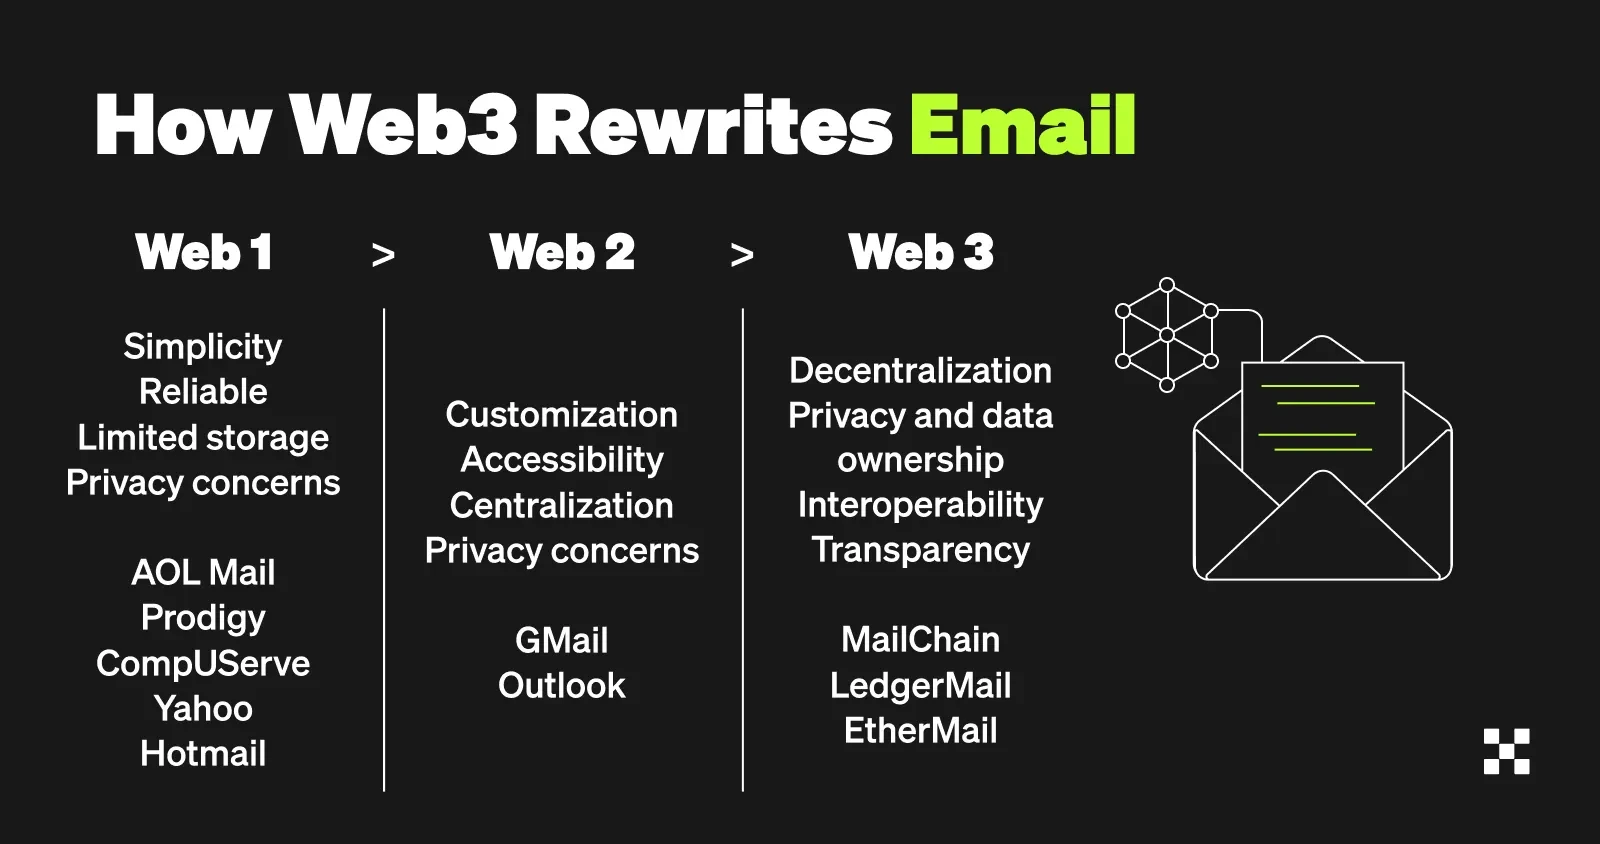 How Web3 rewrites email